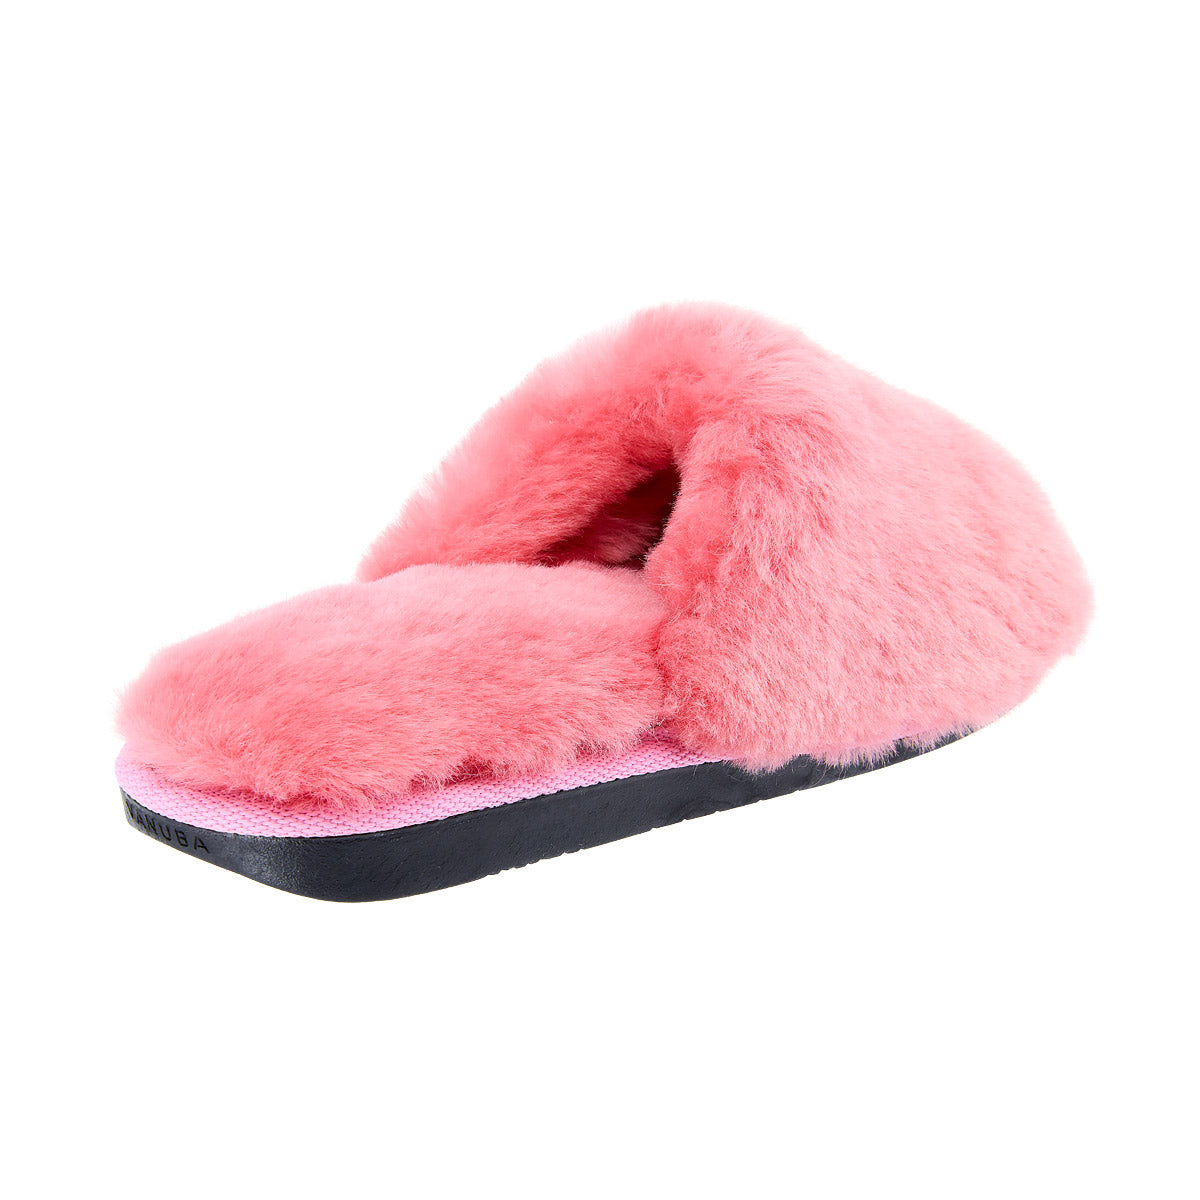 ANOA Coral sheep slippers